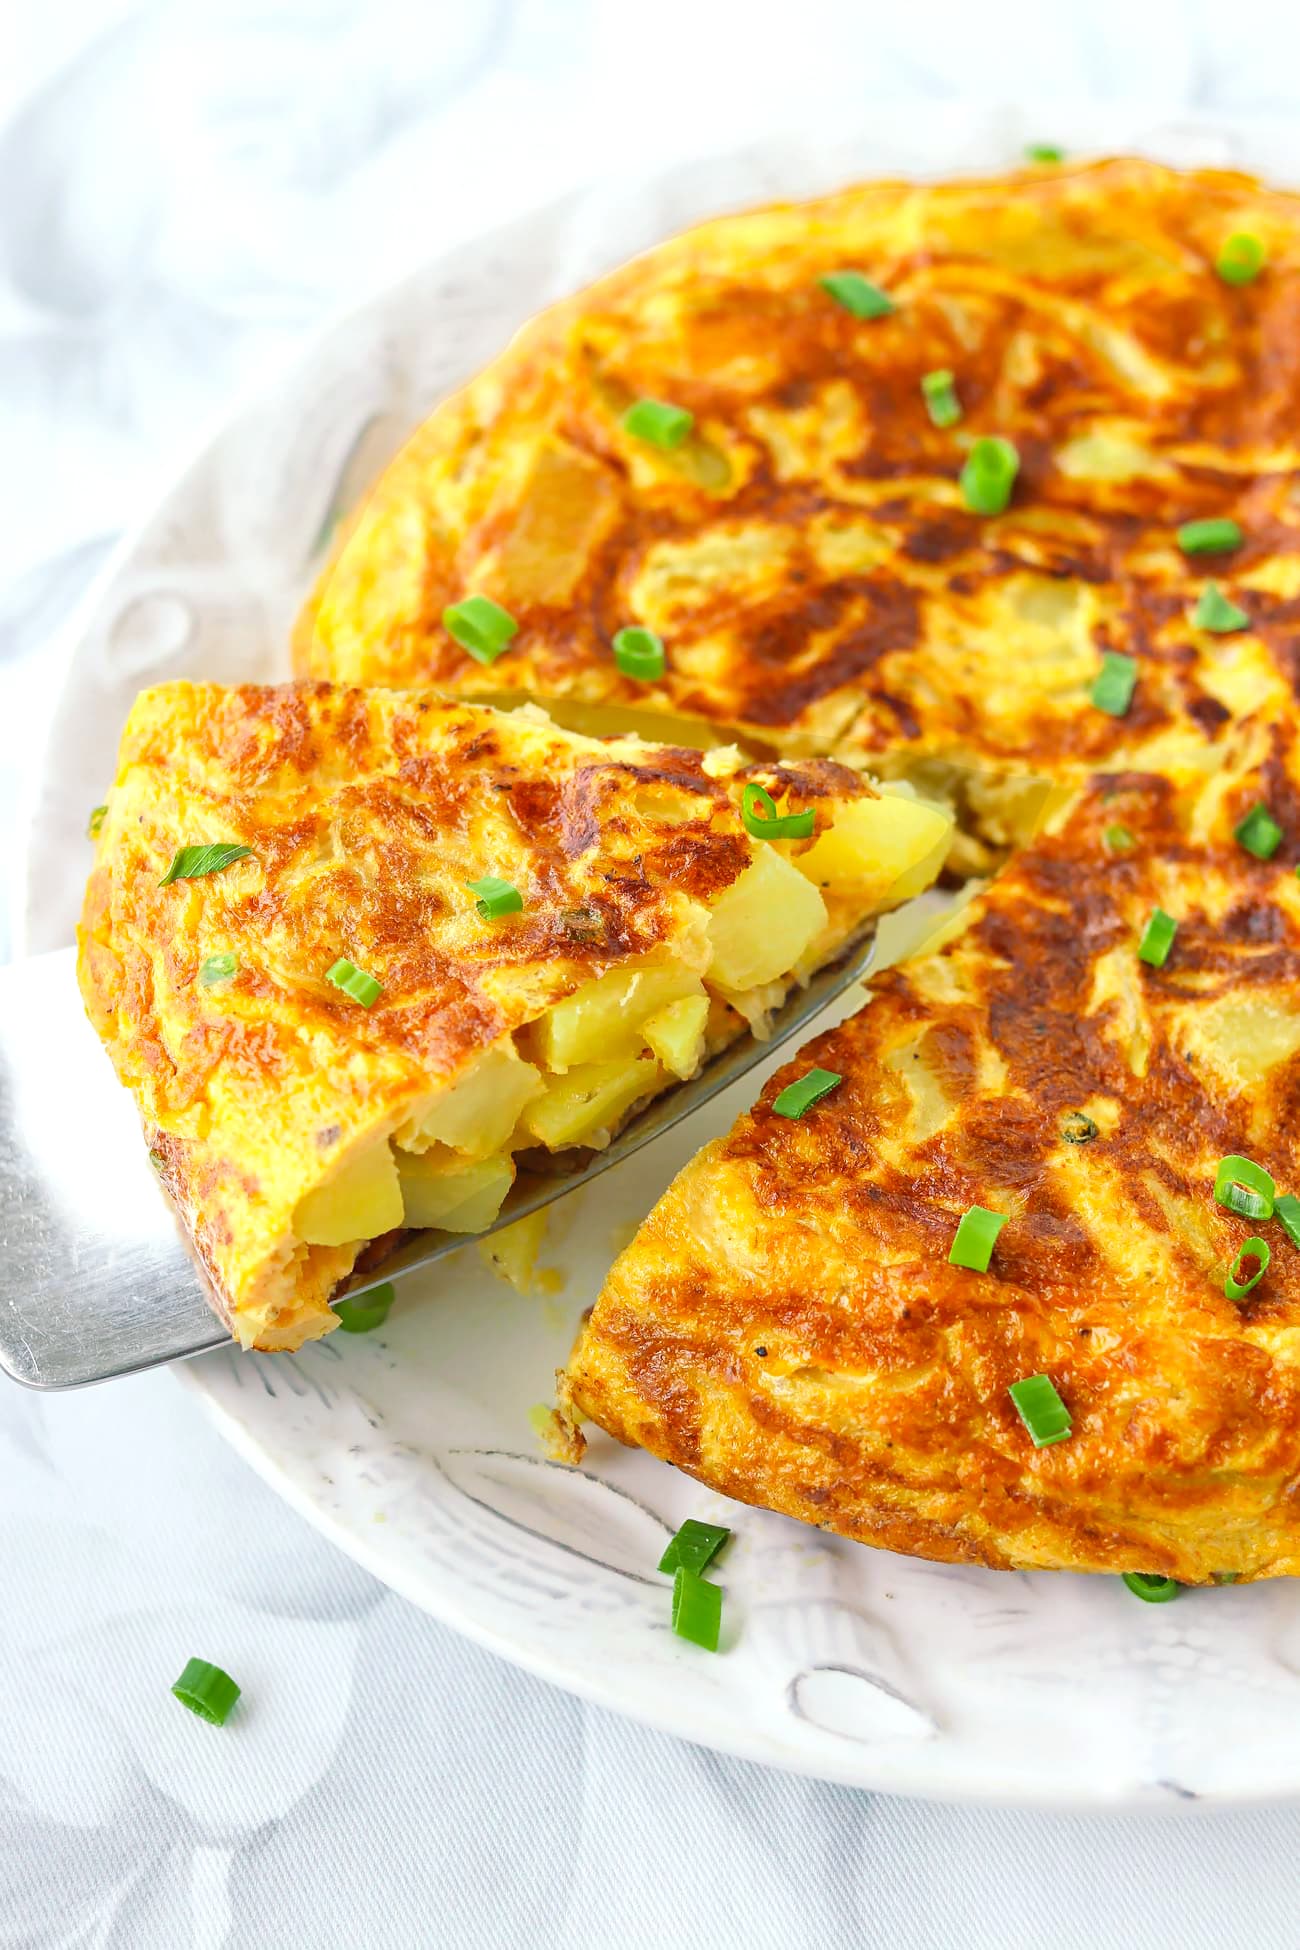 https://thatspicychick.com/wp-content/uploads/2021/01/Tortilla-Espanola-front-view-on-plate-with-sliced-wedge.jpg